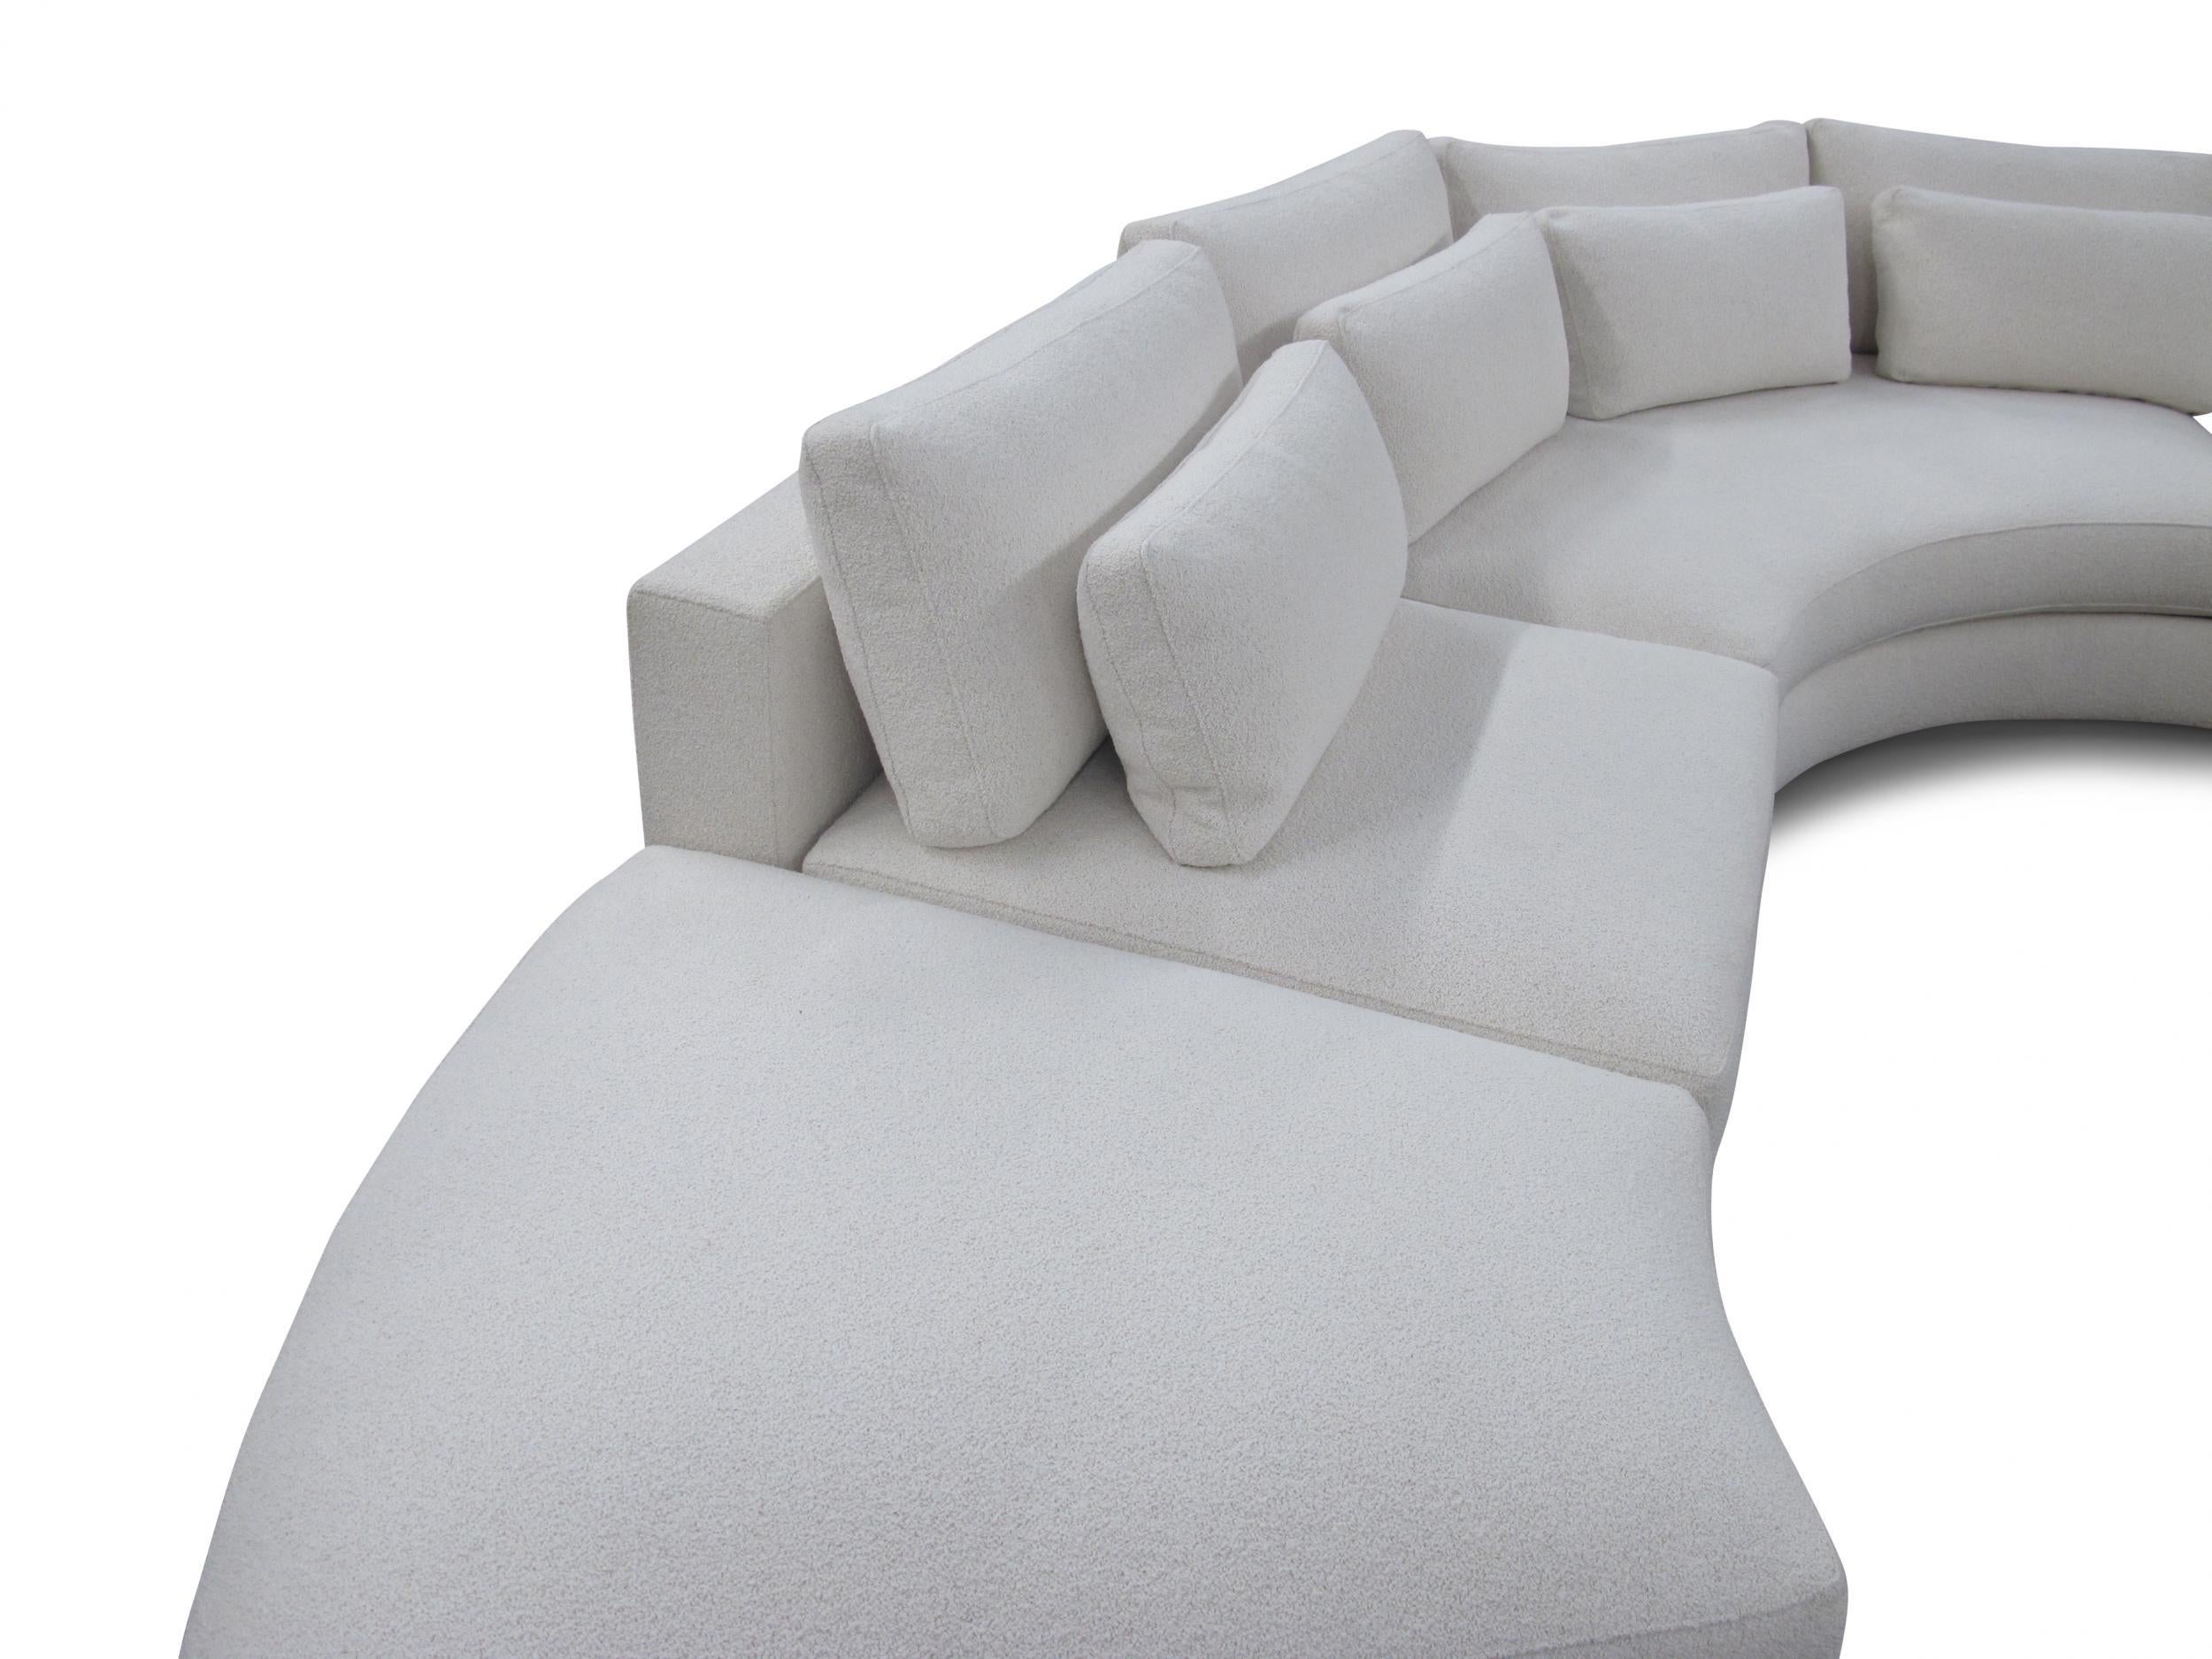 Contemporary Thayer Coggin Round Sectional Sofa in off White